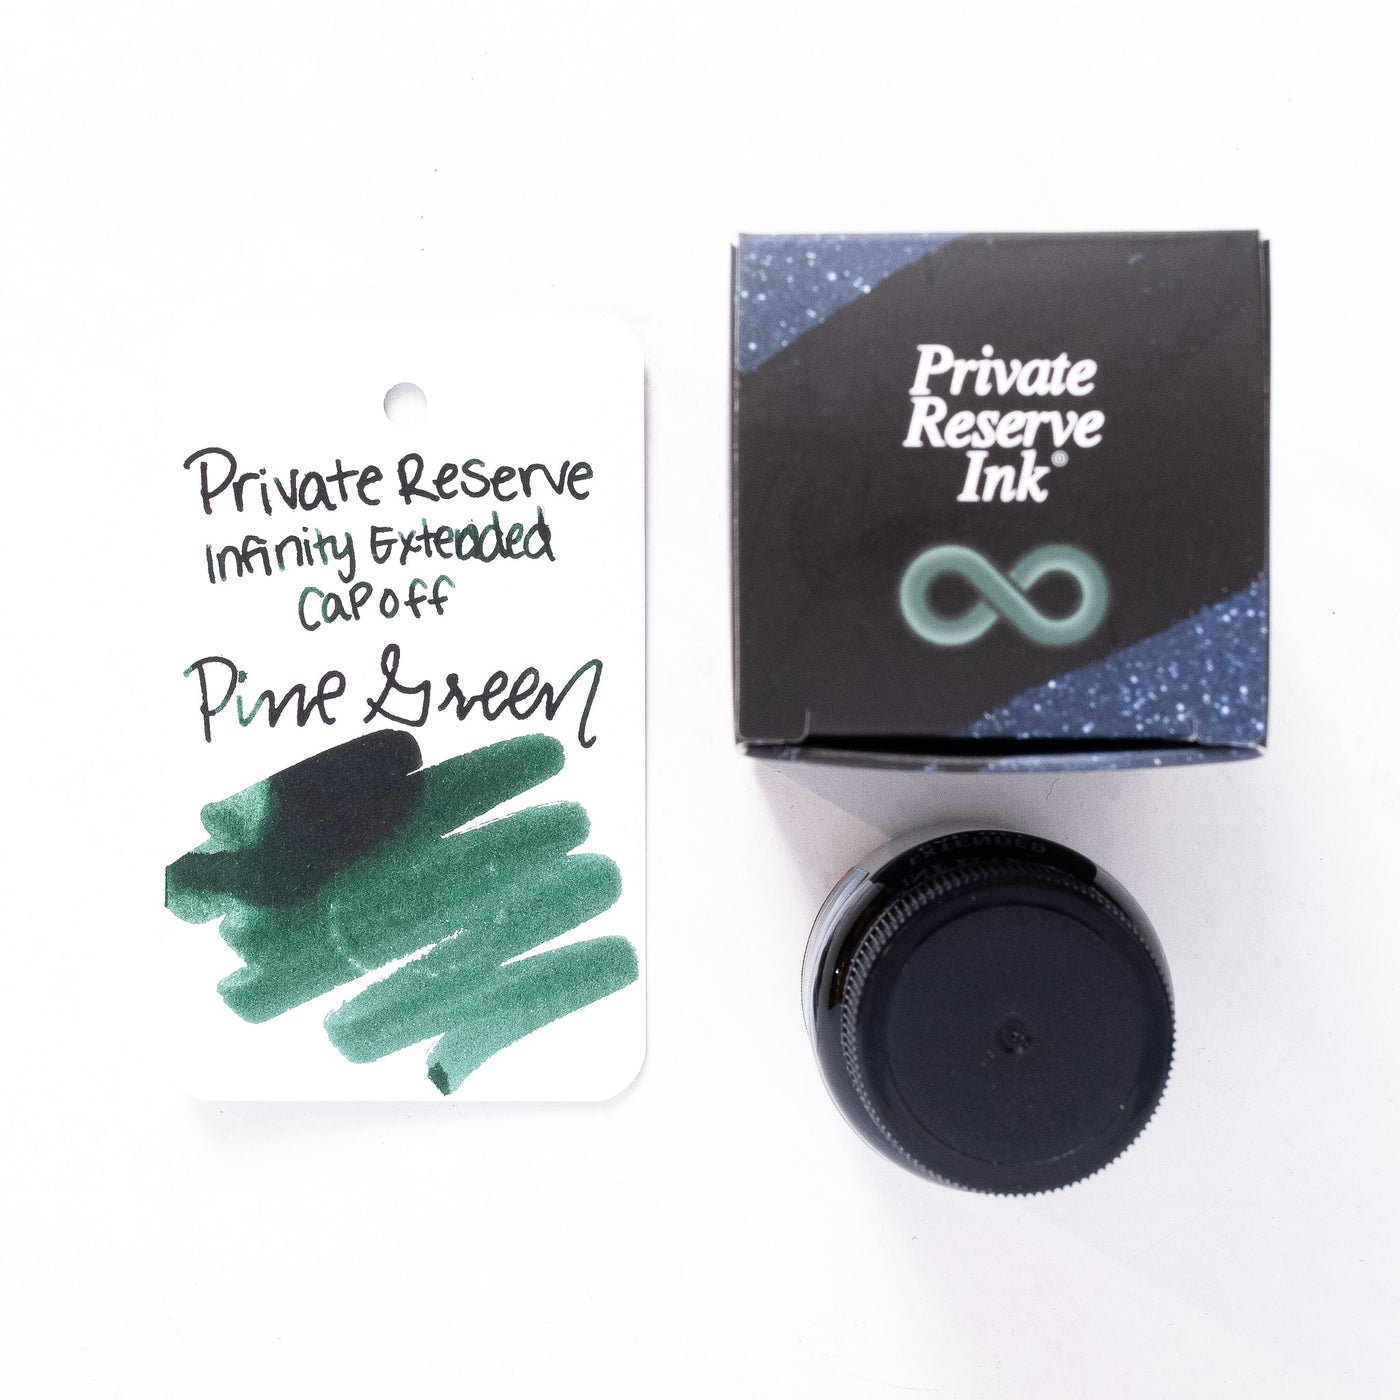 Private Reserve Infinity Extended Cap Off Pine Green Ink Bottle 30ml